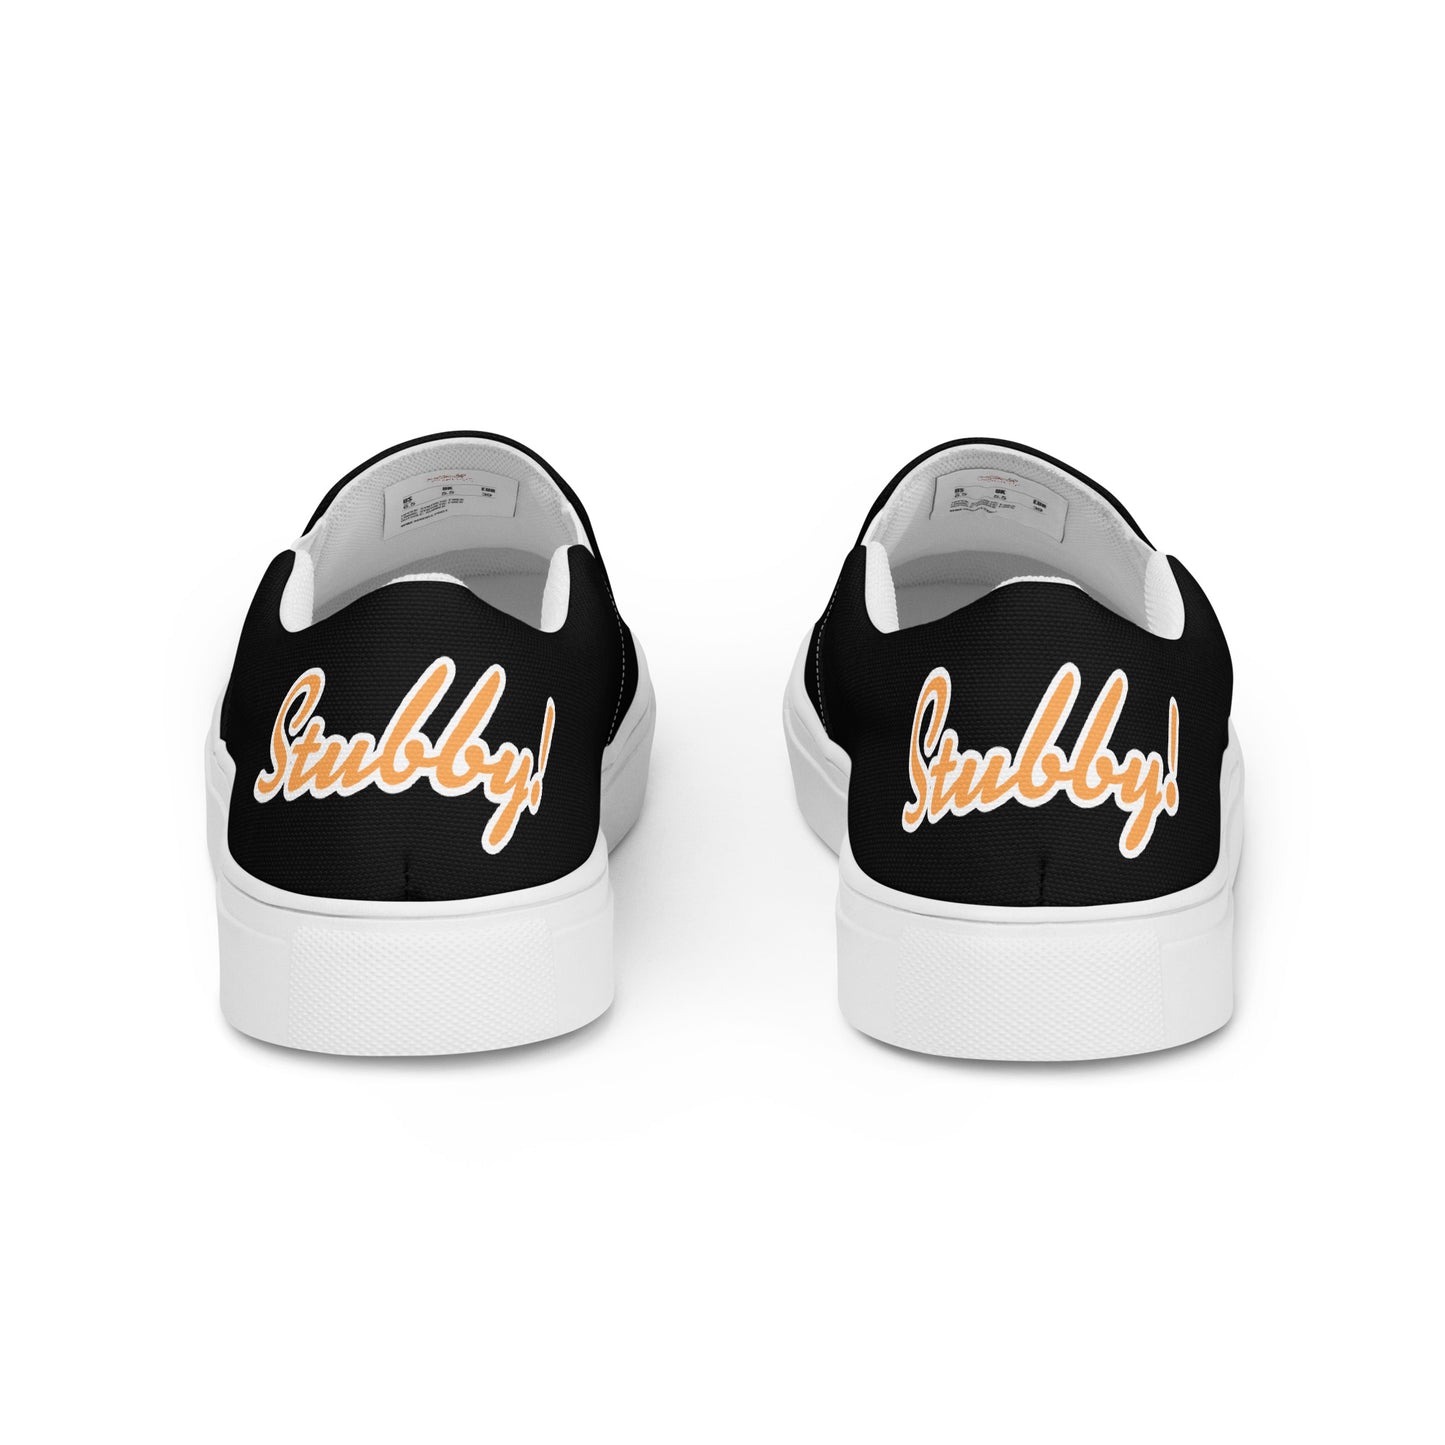 "My Name is Musky! Stubby's Story" Women's Slip On Canvas Shoes!